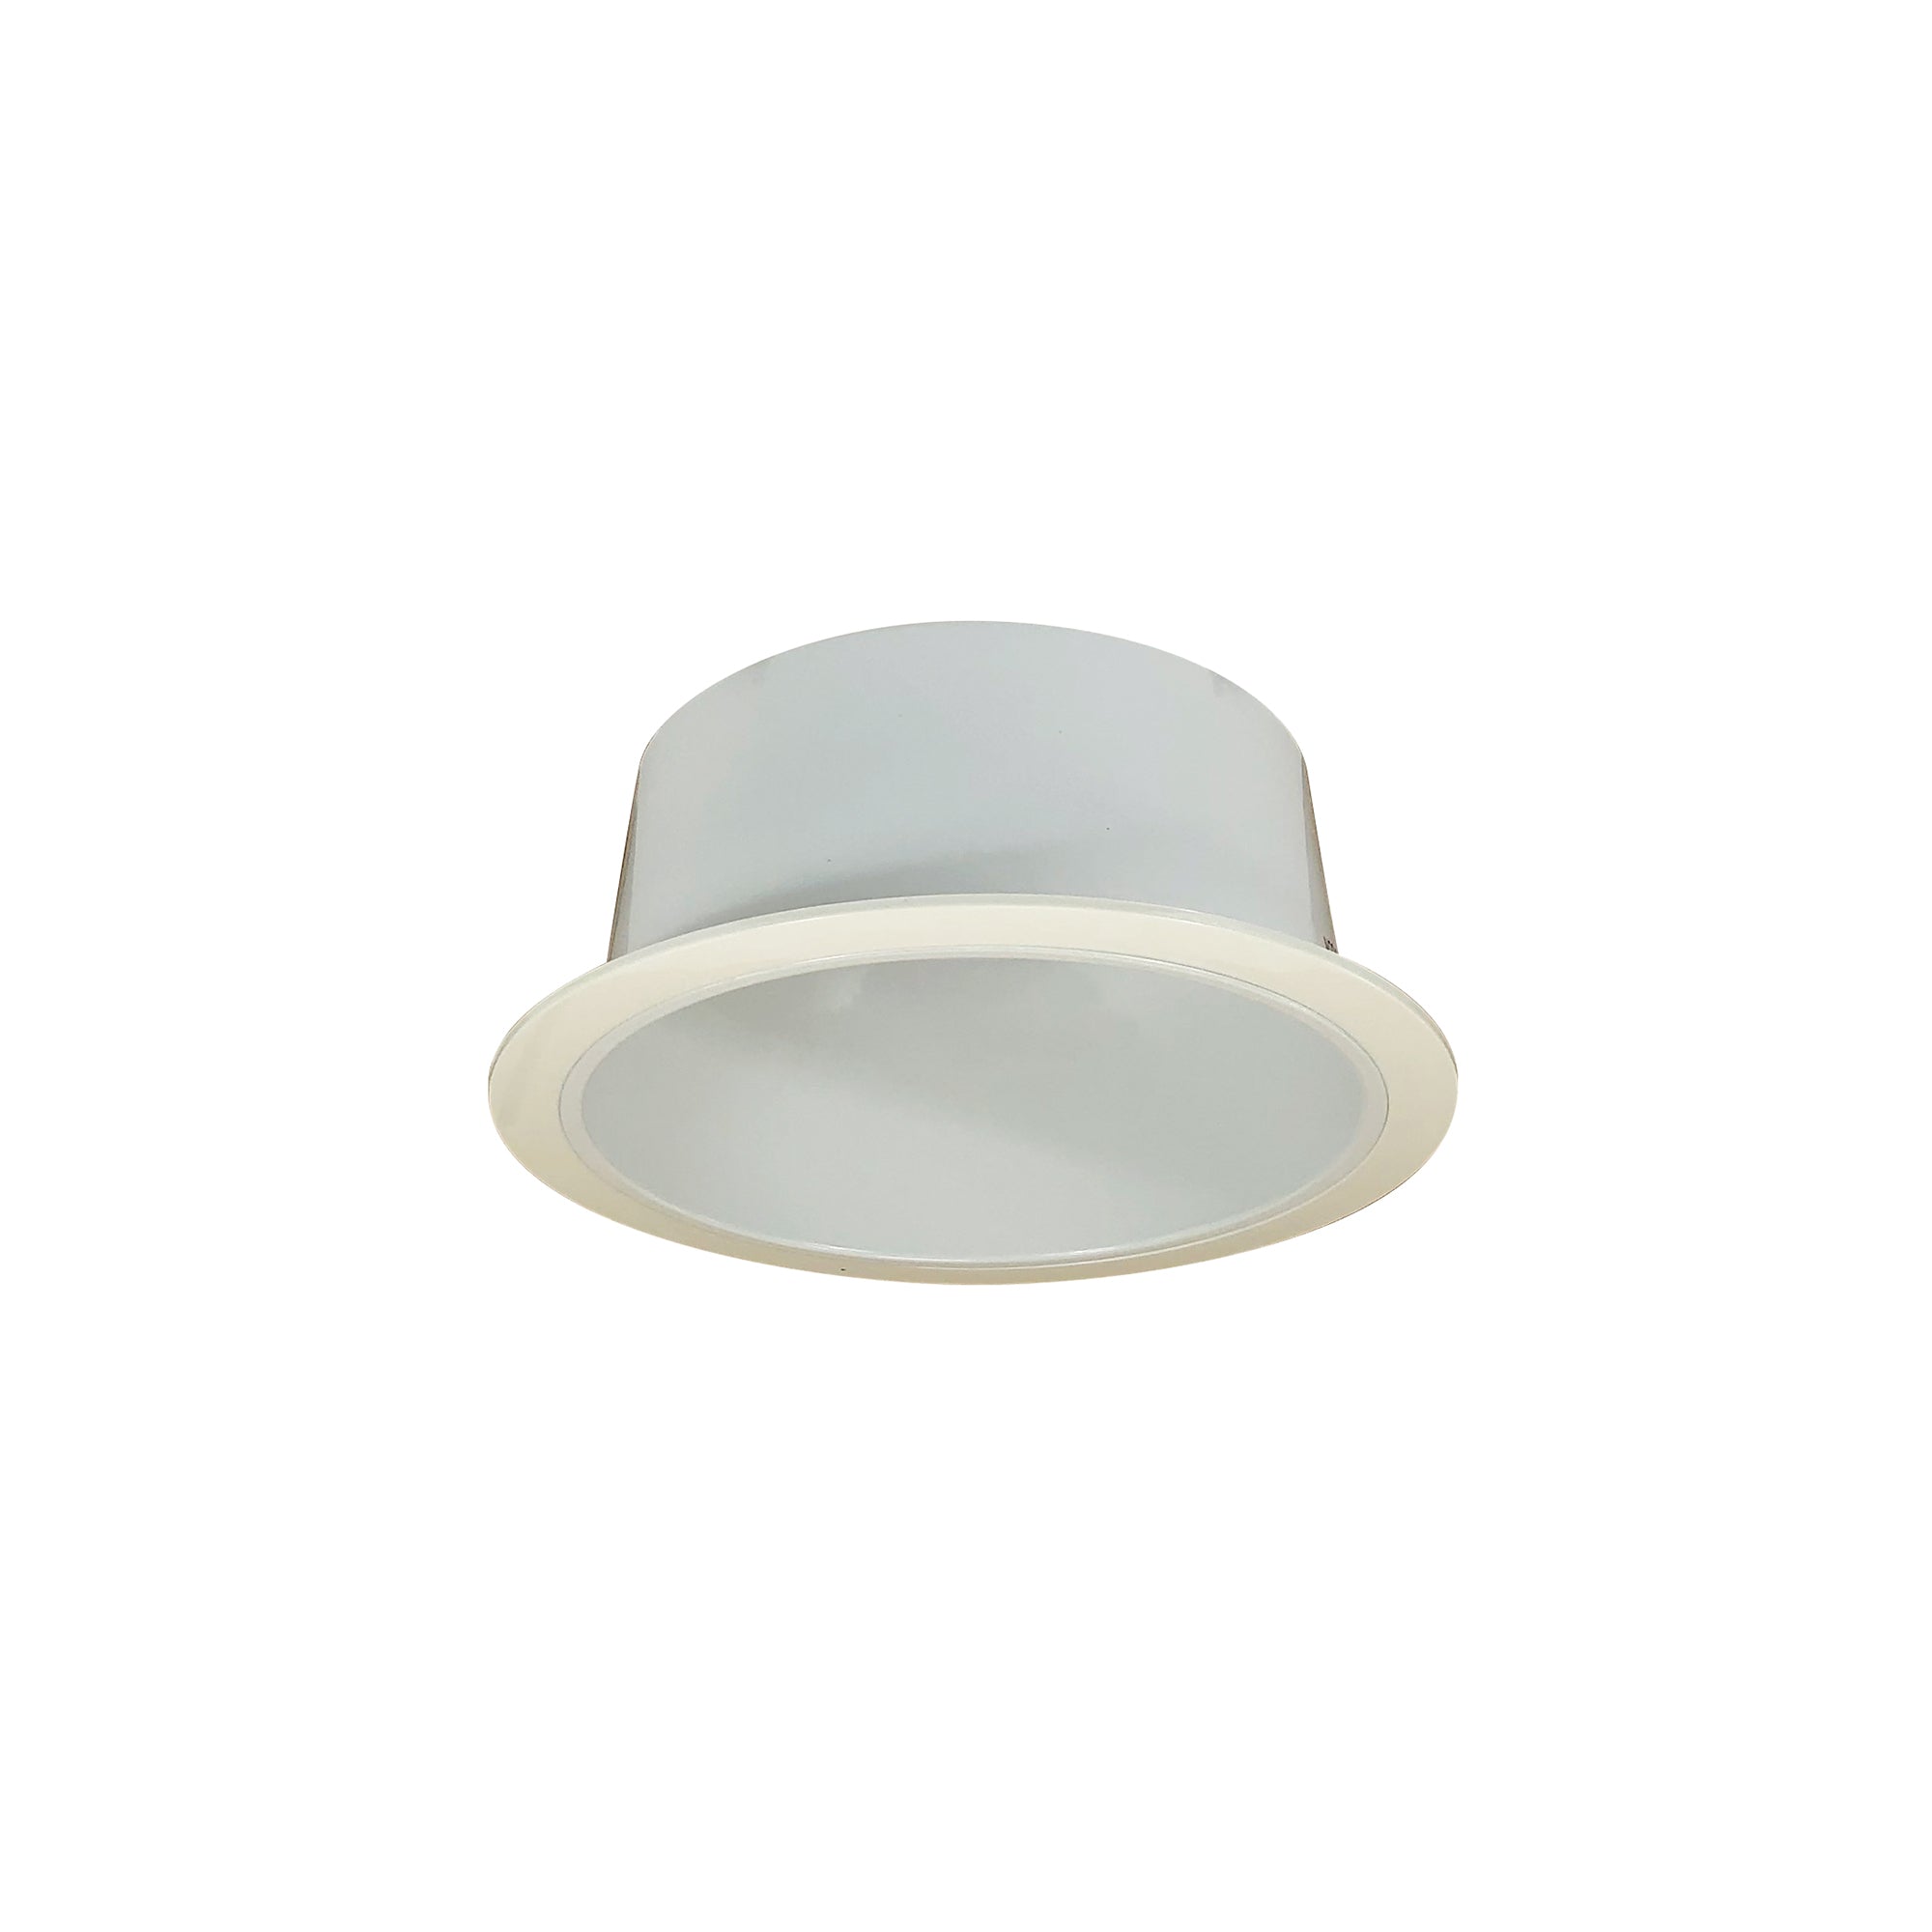 Nora Lighting NTS-33 - Recessed - 6 Inch Specular White Reflector w/ White Plastic Ring